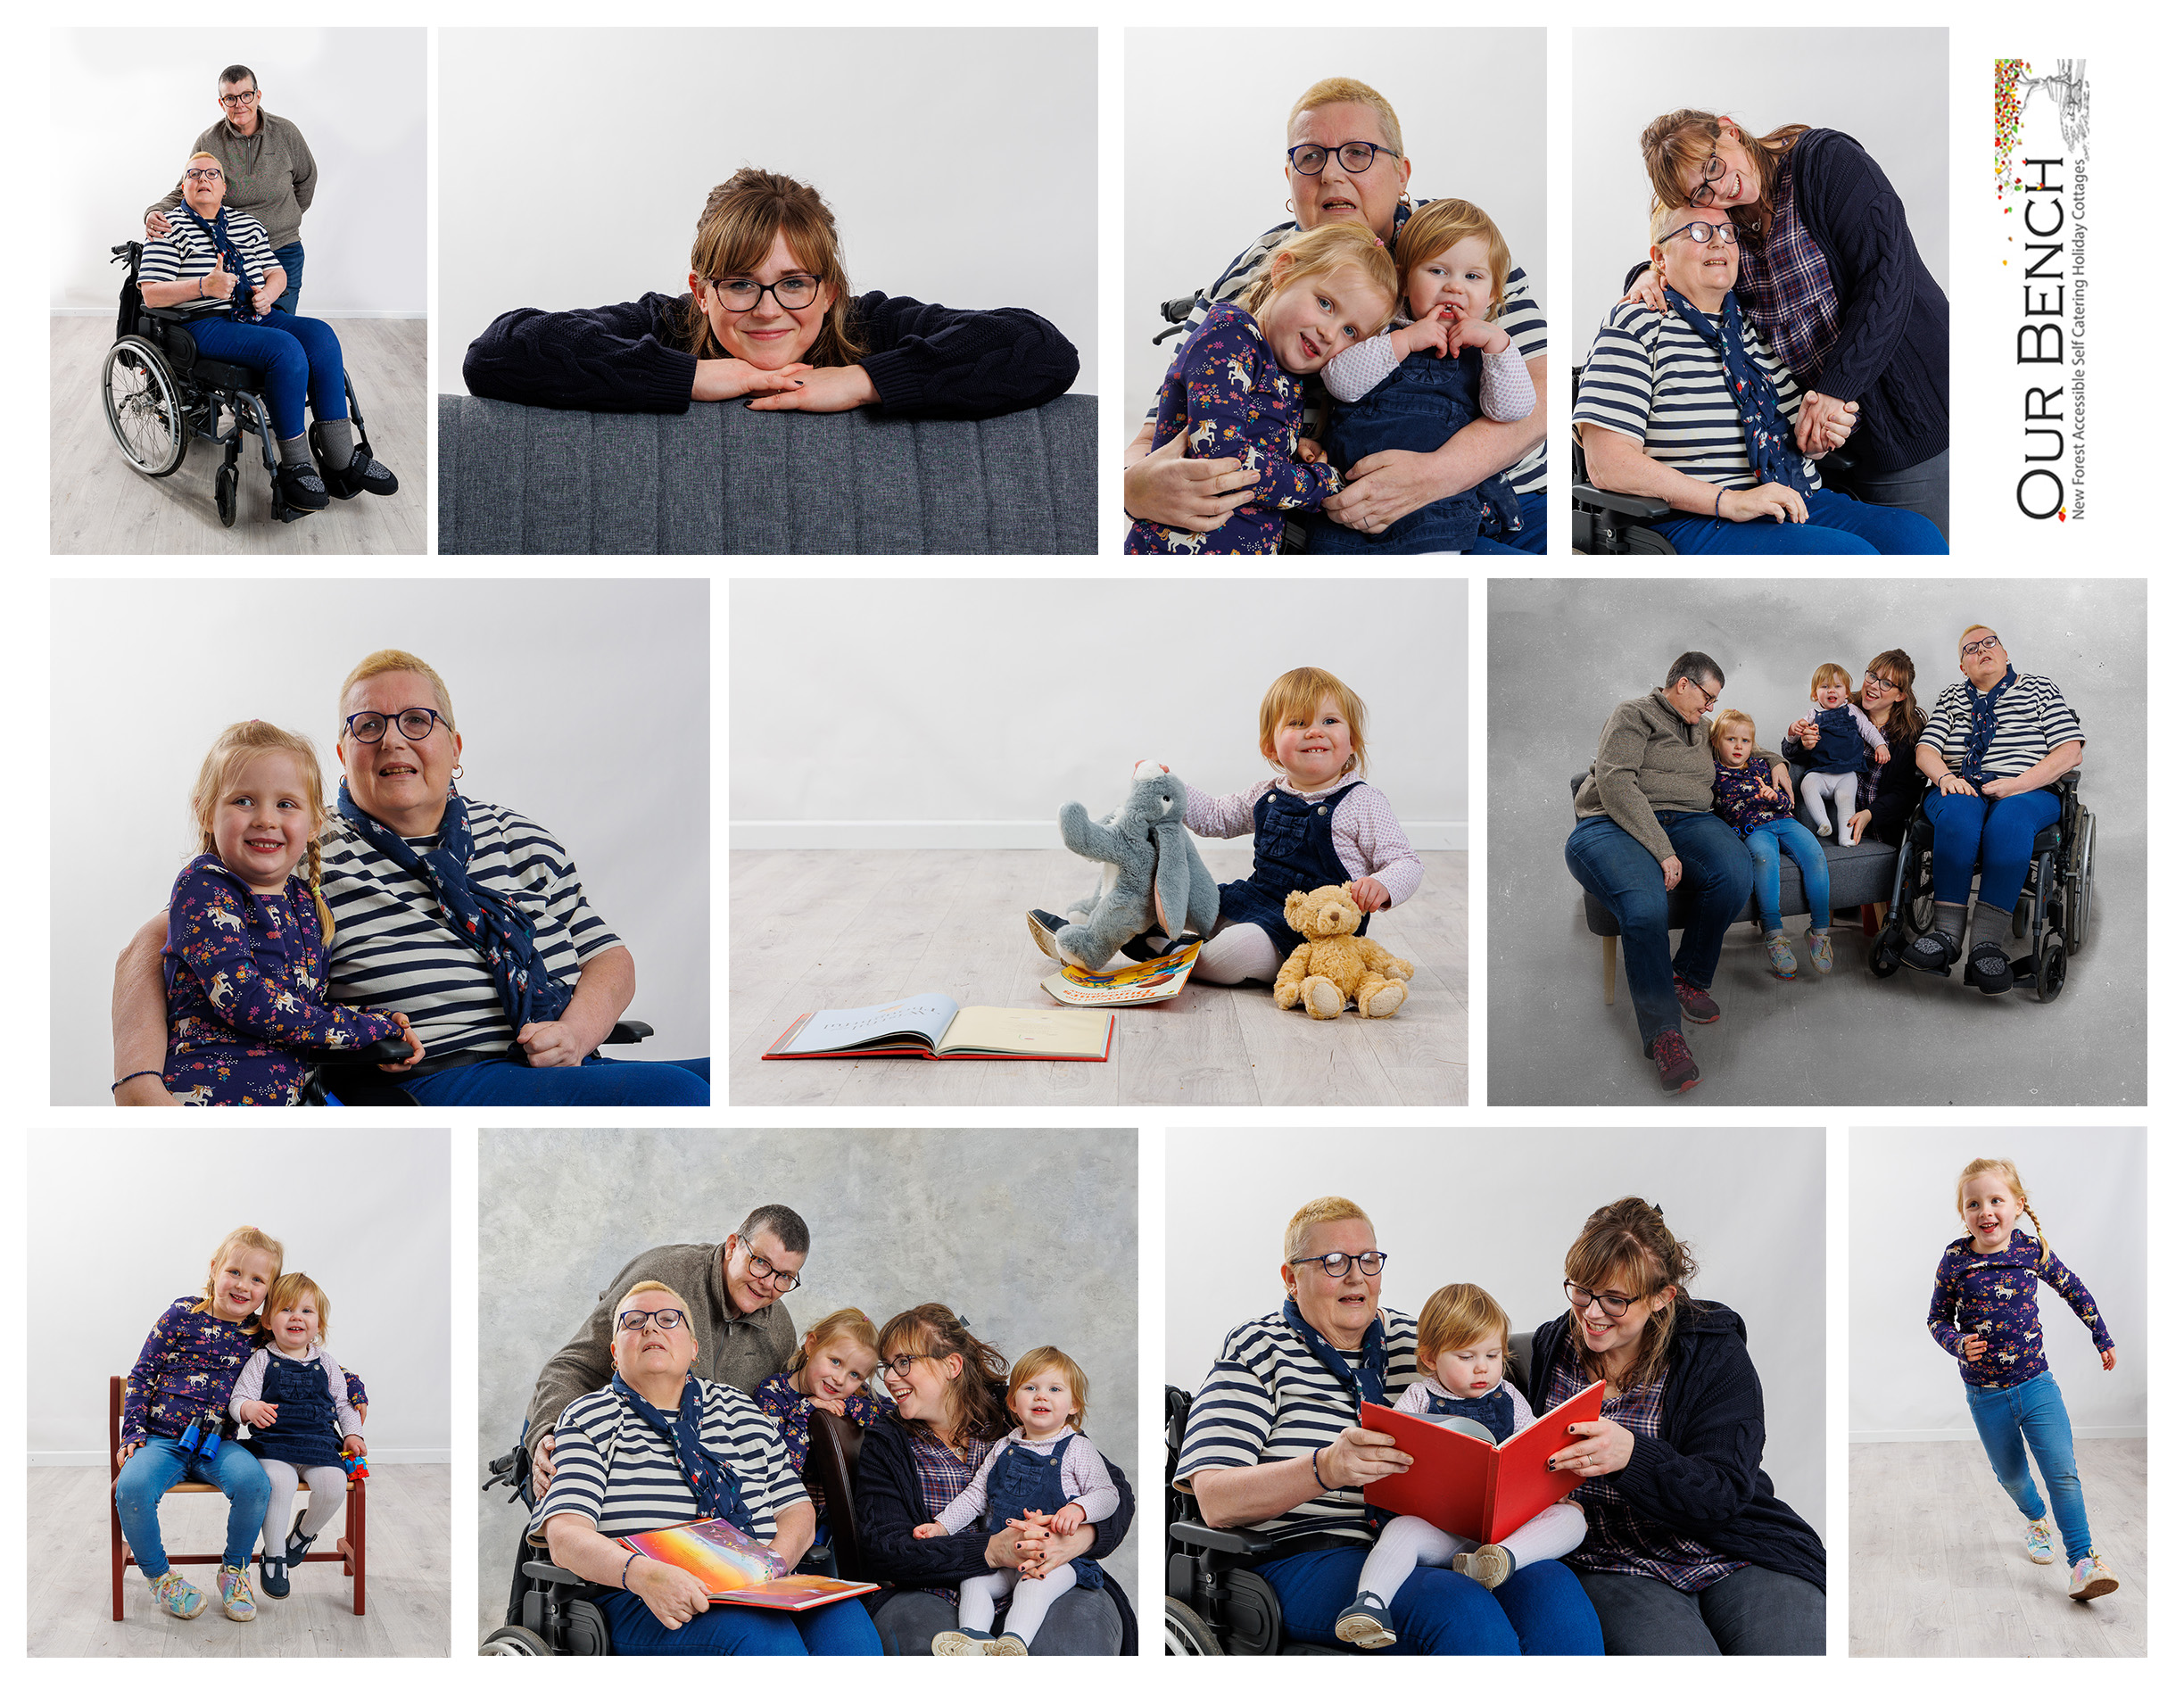 Maggie and her family in the studio